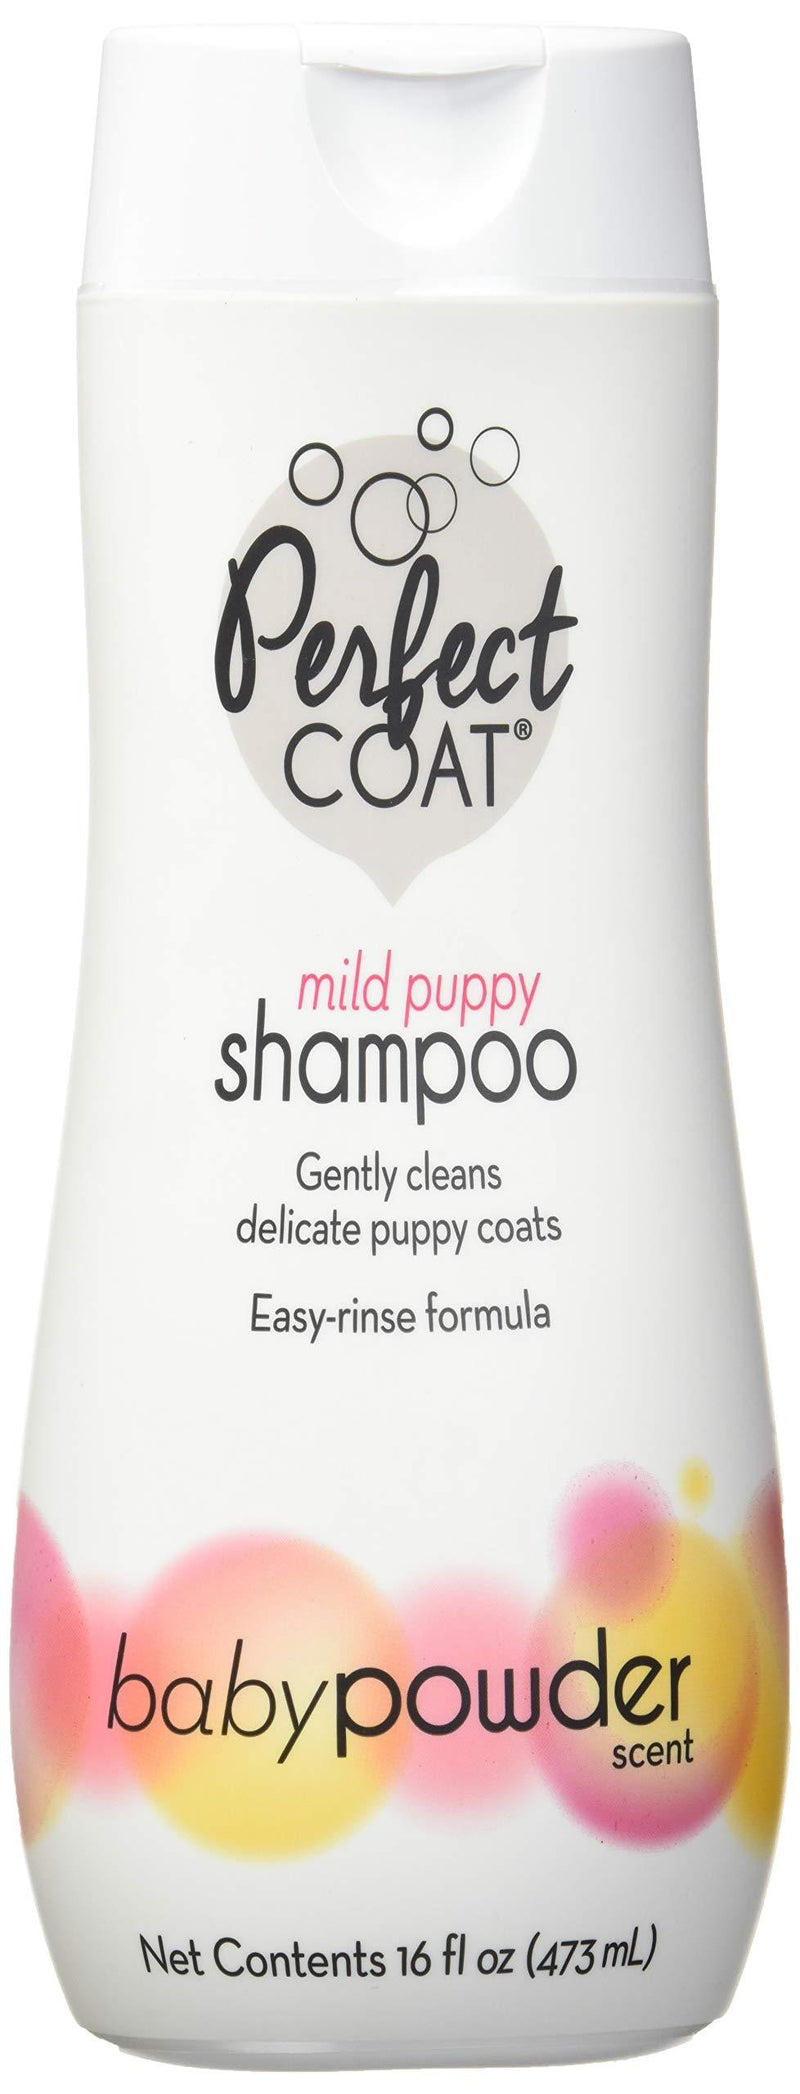 [Australia] - Perfect Coat Pampered Puppy Shampoo, Baby Powder Scent 16-Ounce 